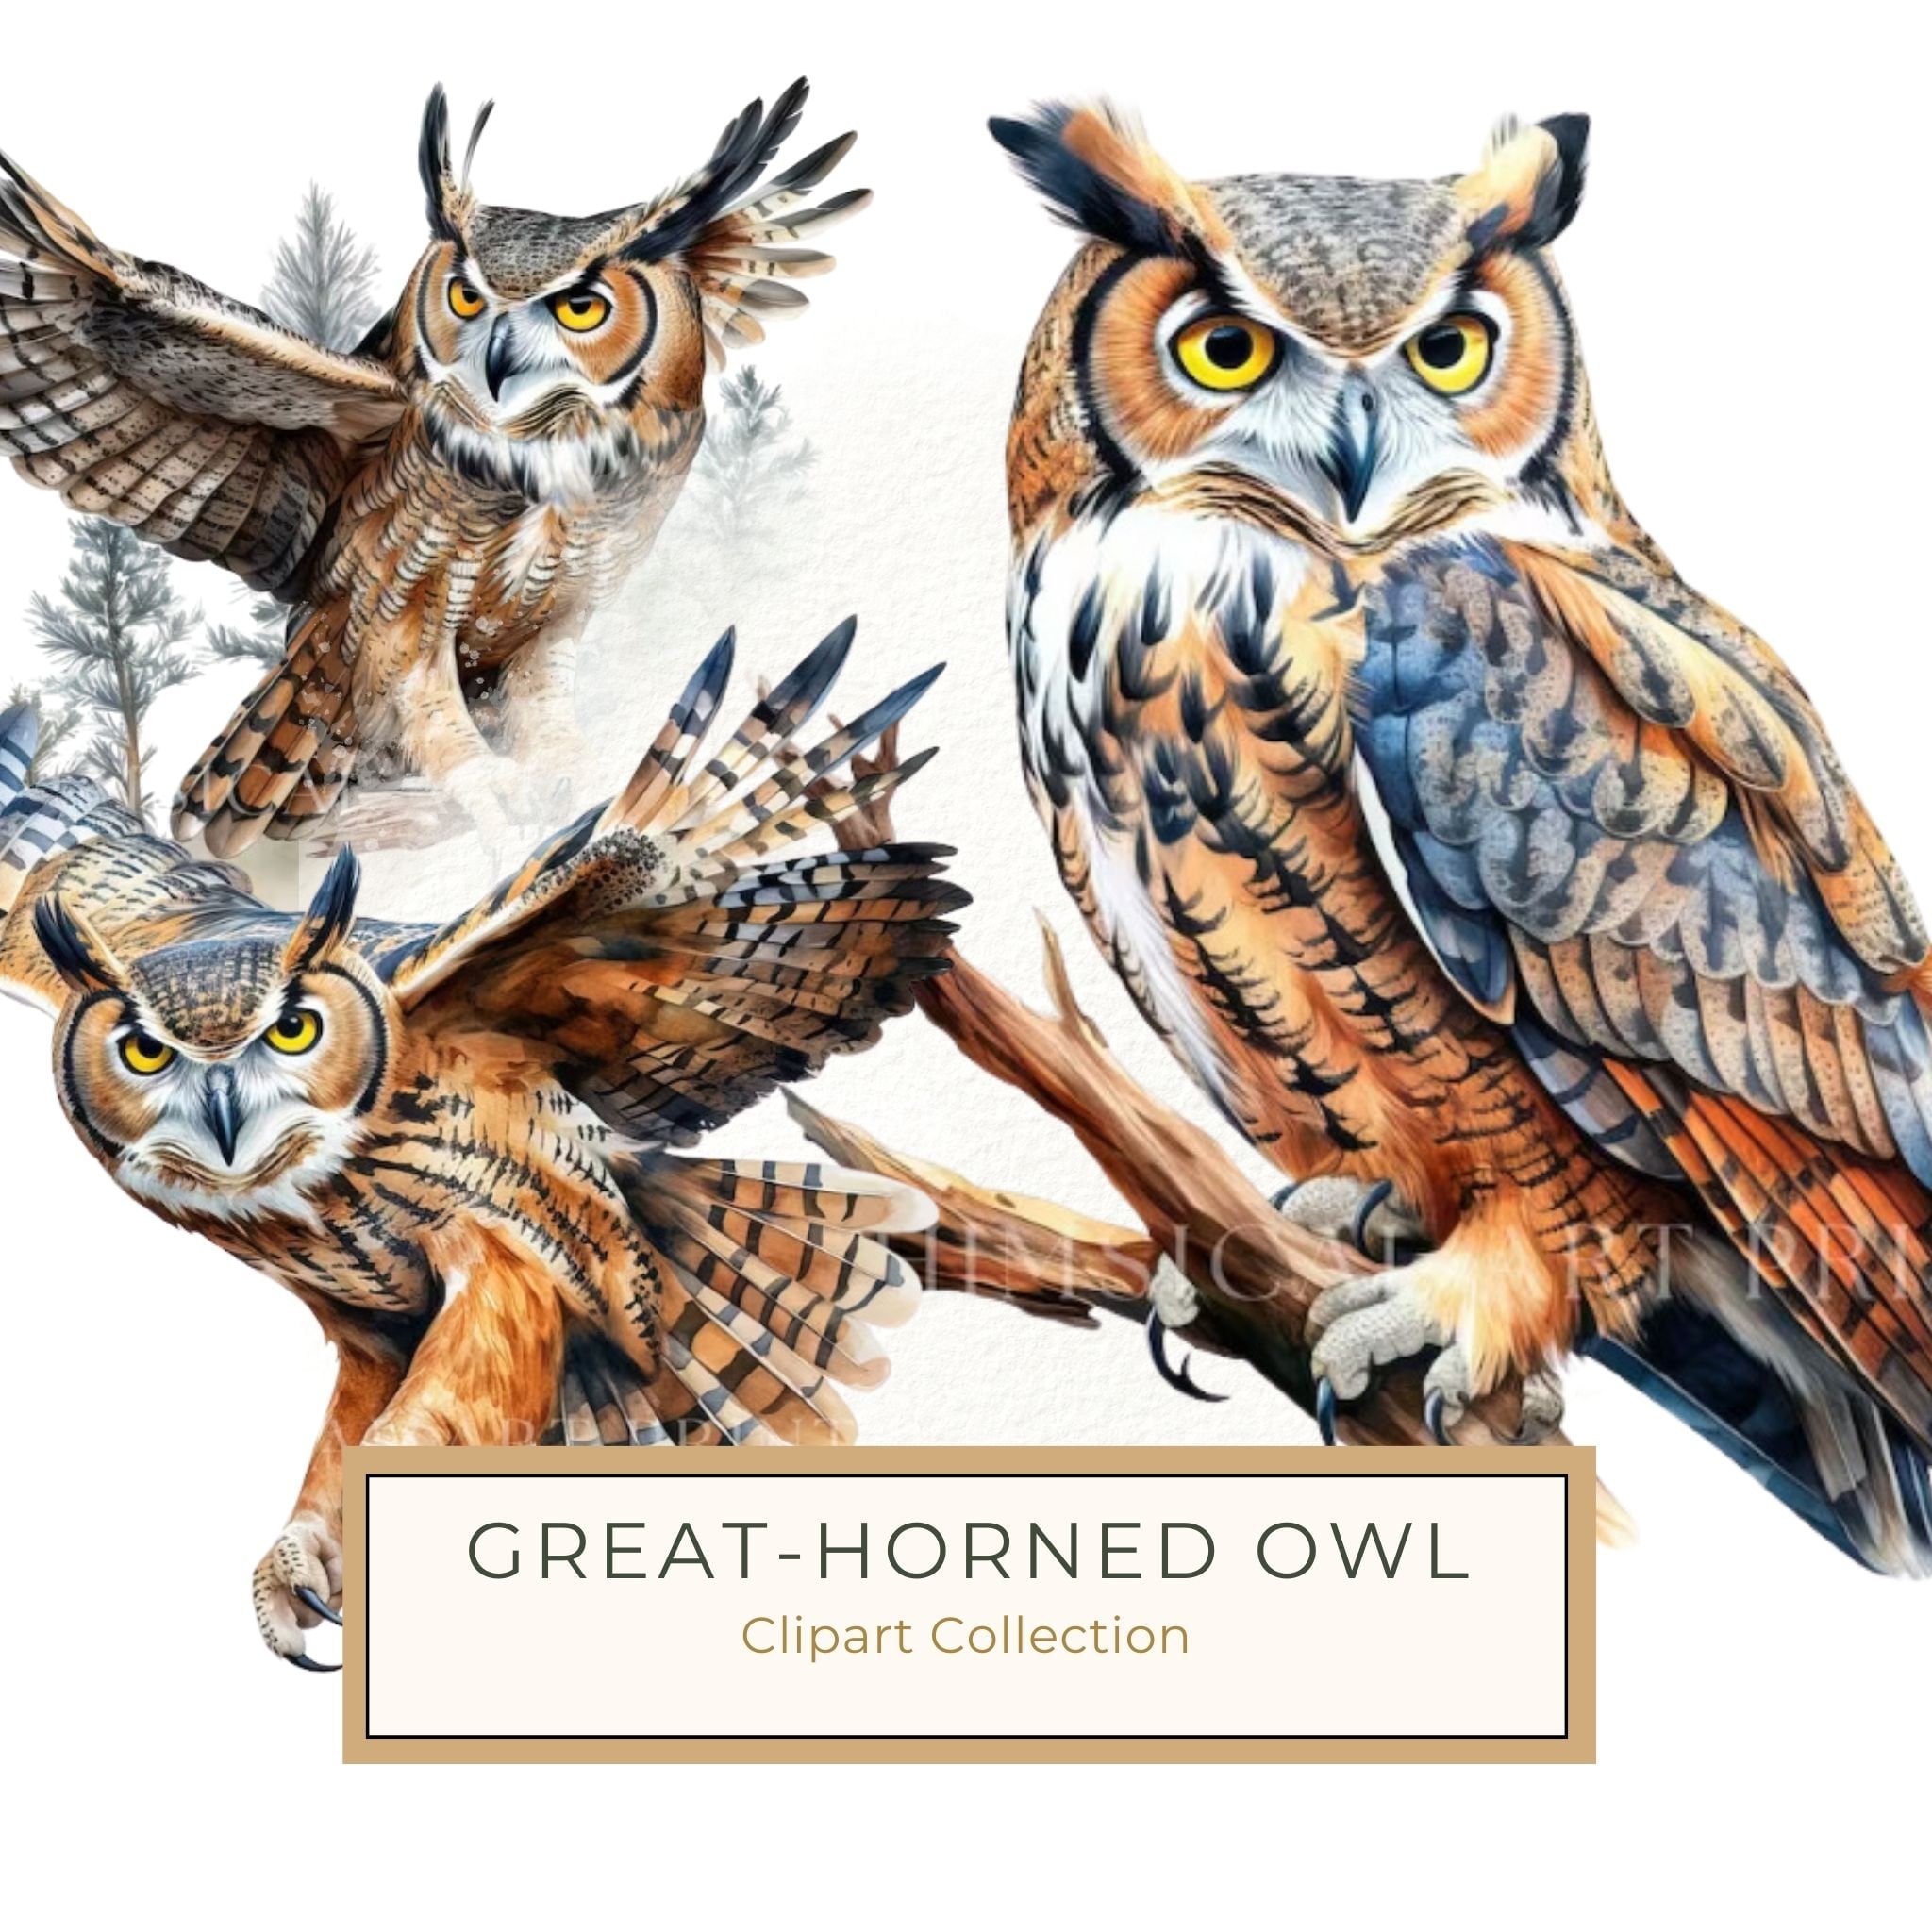 Great-horned Owl Clipart, Bird Clipart, Watercolor Great-horned Owls, Owl Art Printable, Commercial 